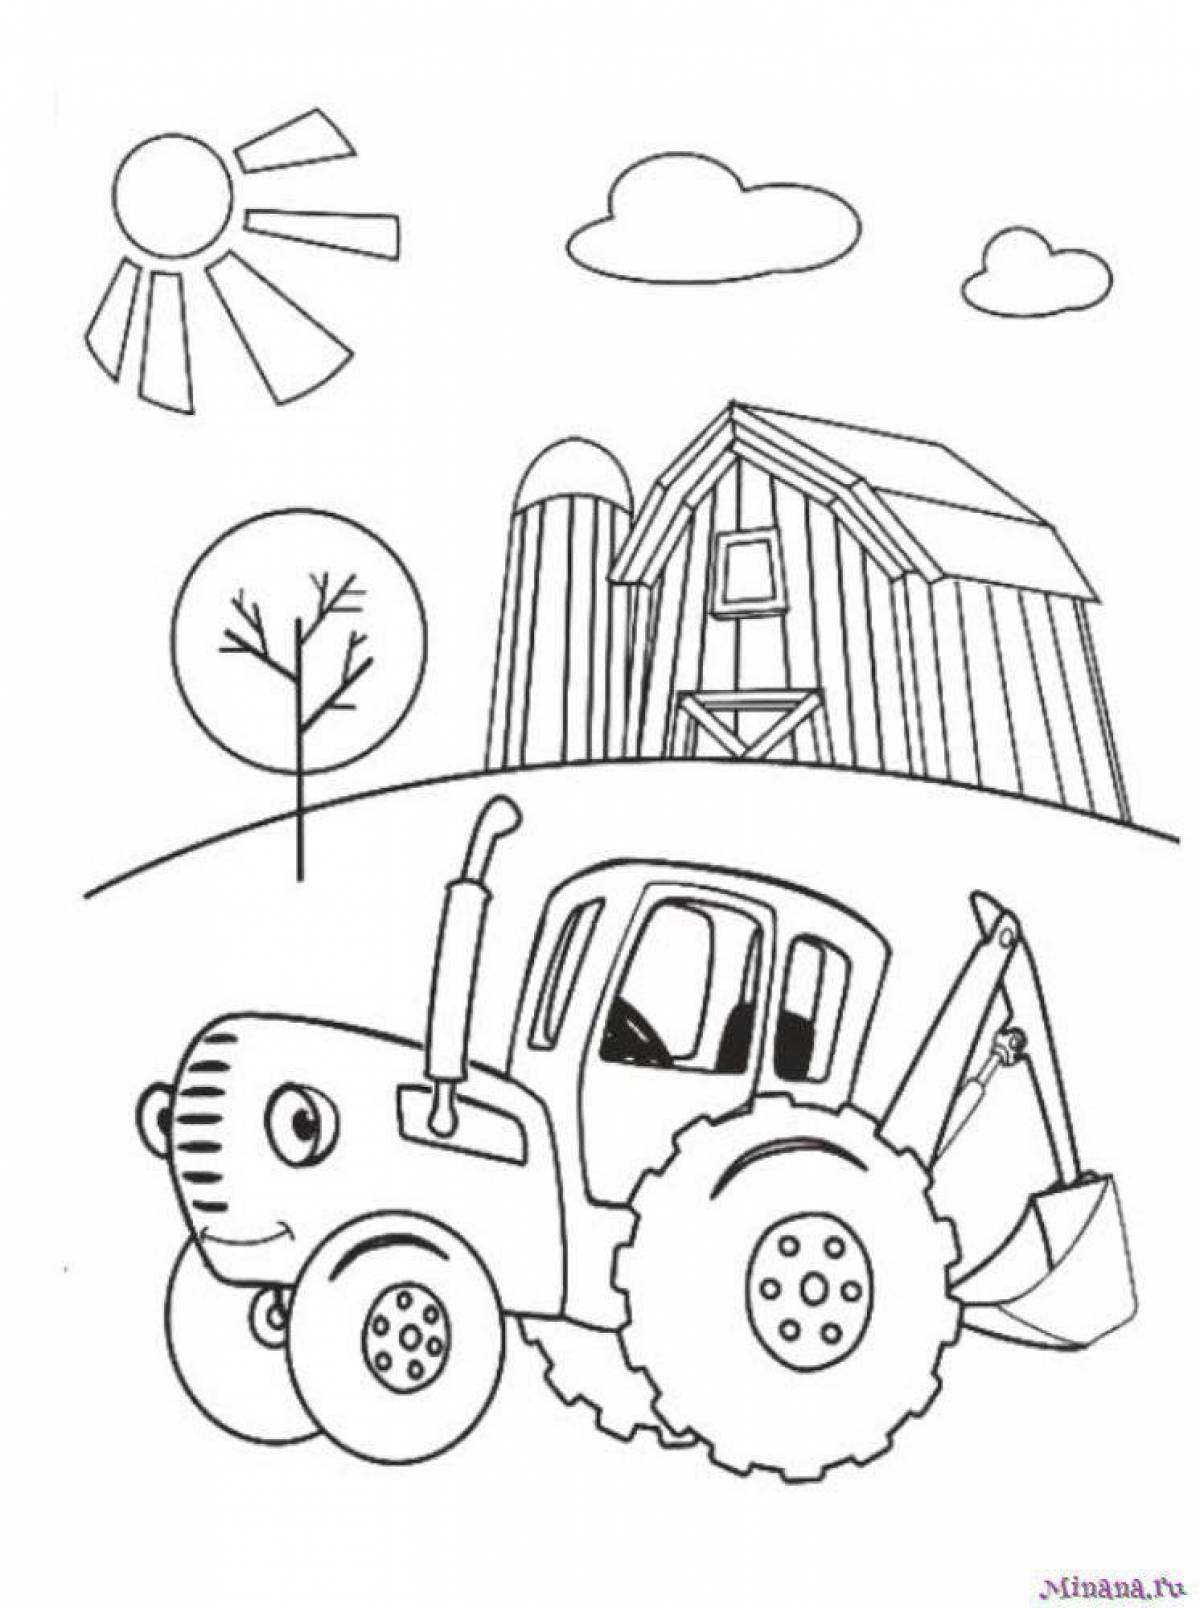 A wonderful blue tractor coloring book for 2-3 year olds